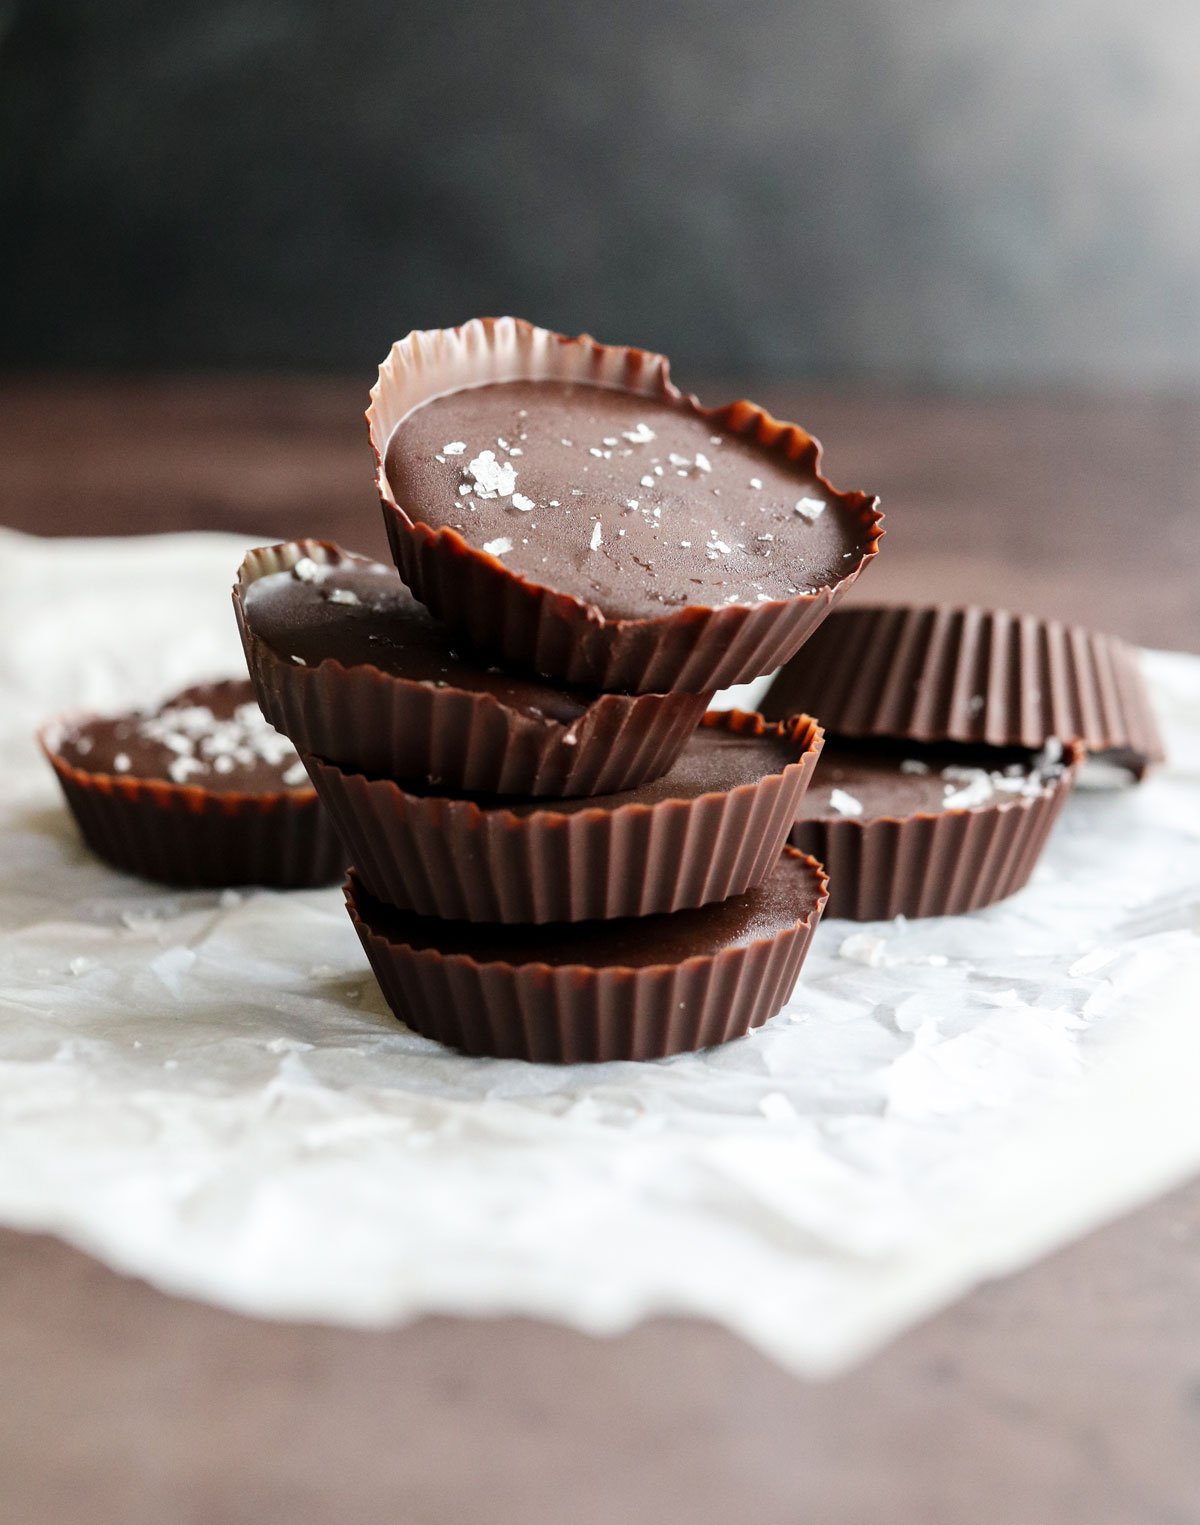 peanut butter cups stacked with flaky sea salt on top.